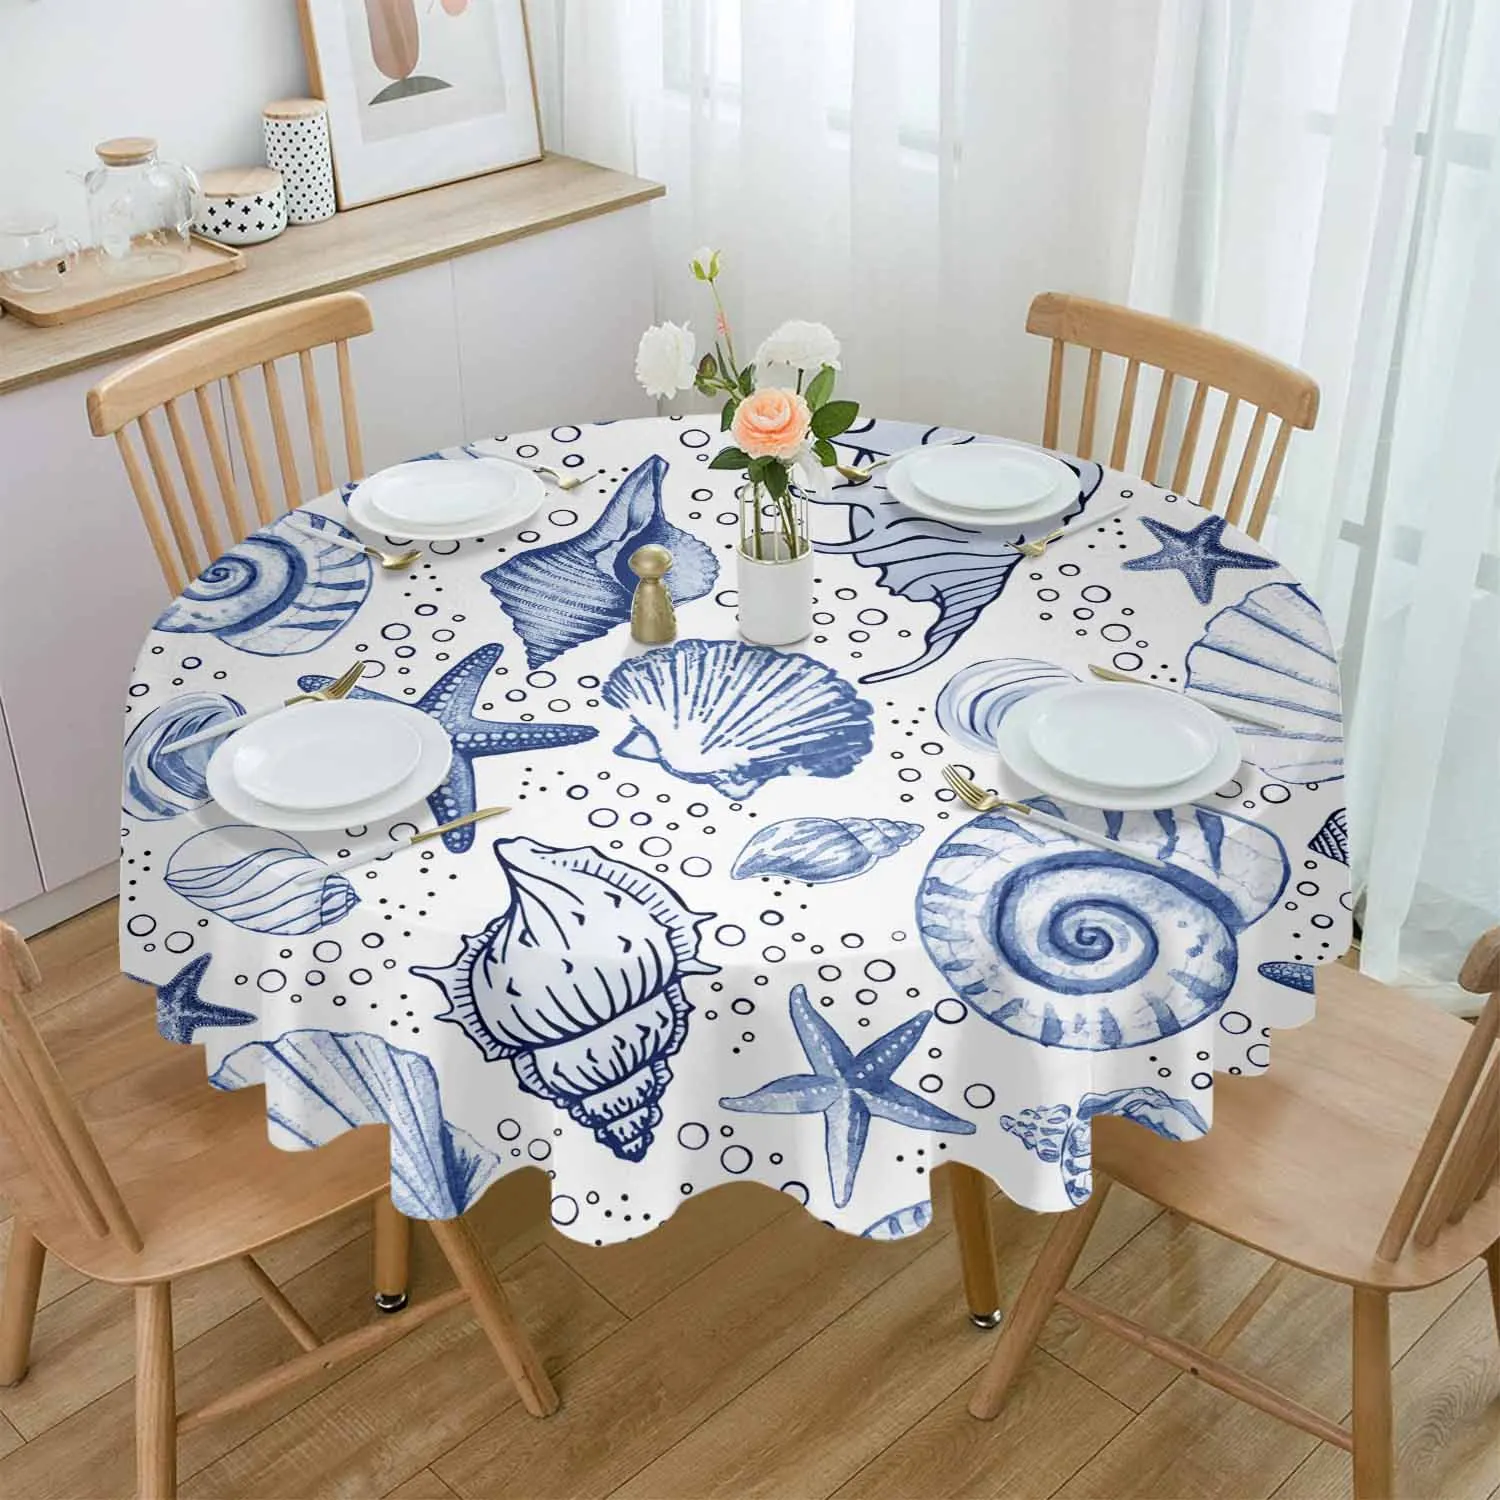 

Ocean Starfish Shell Table Cloth Waterproof Wedding Holiday Tablecloth Coffee Table Decor Table Cover